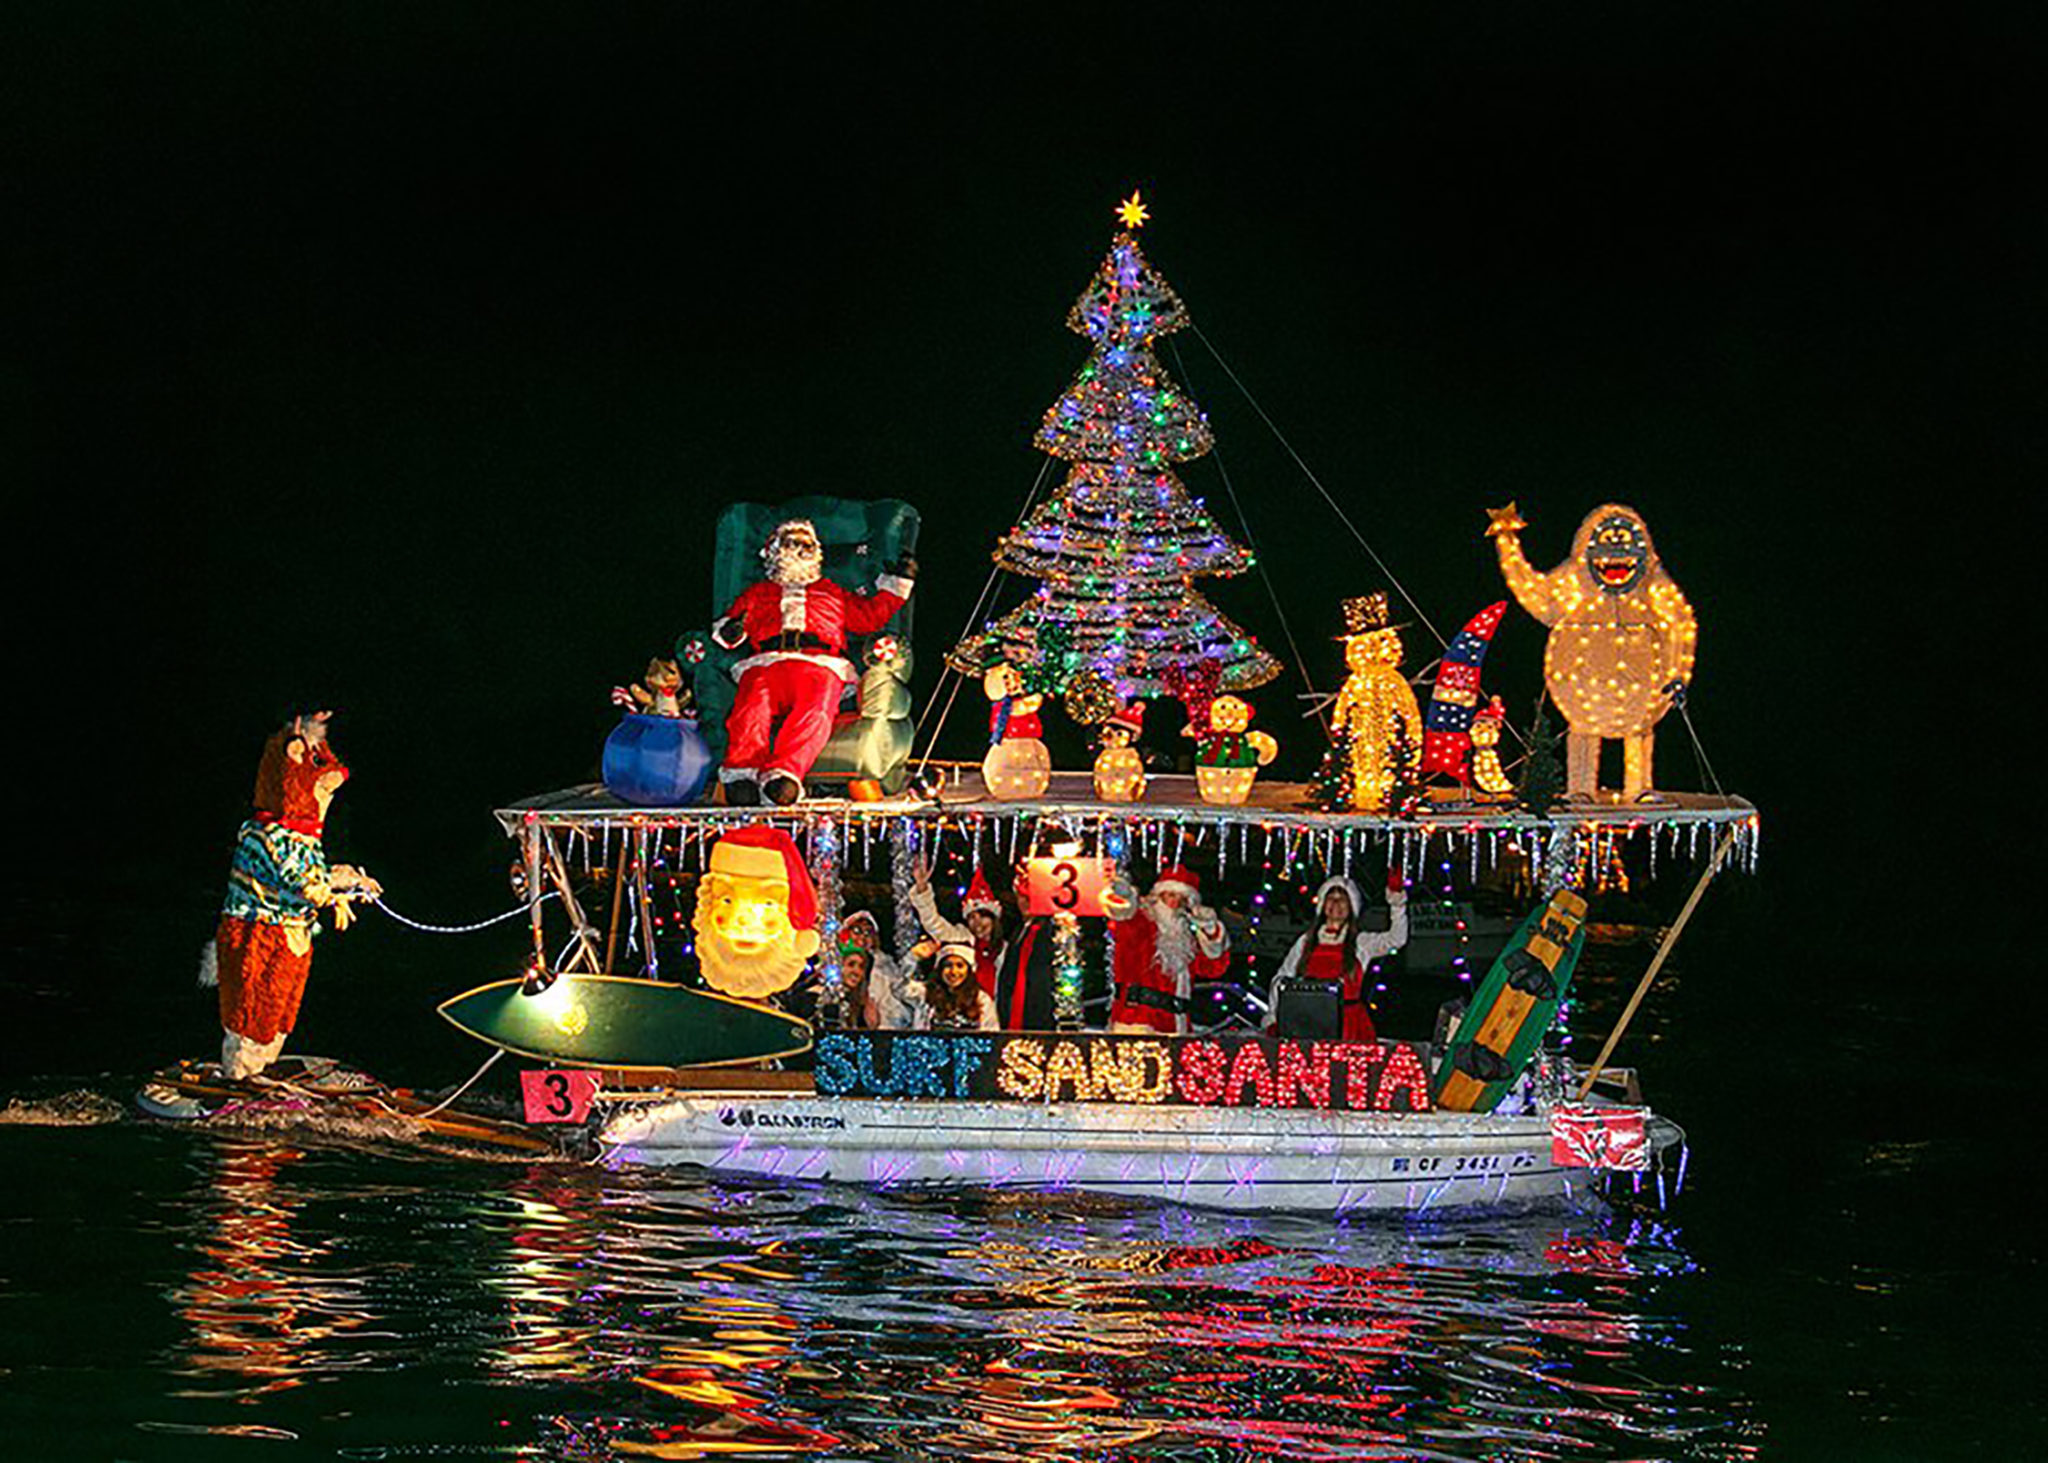 Boat in the Christmas Boat Parade